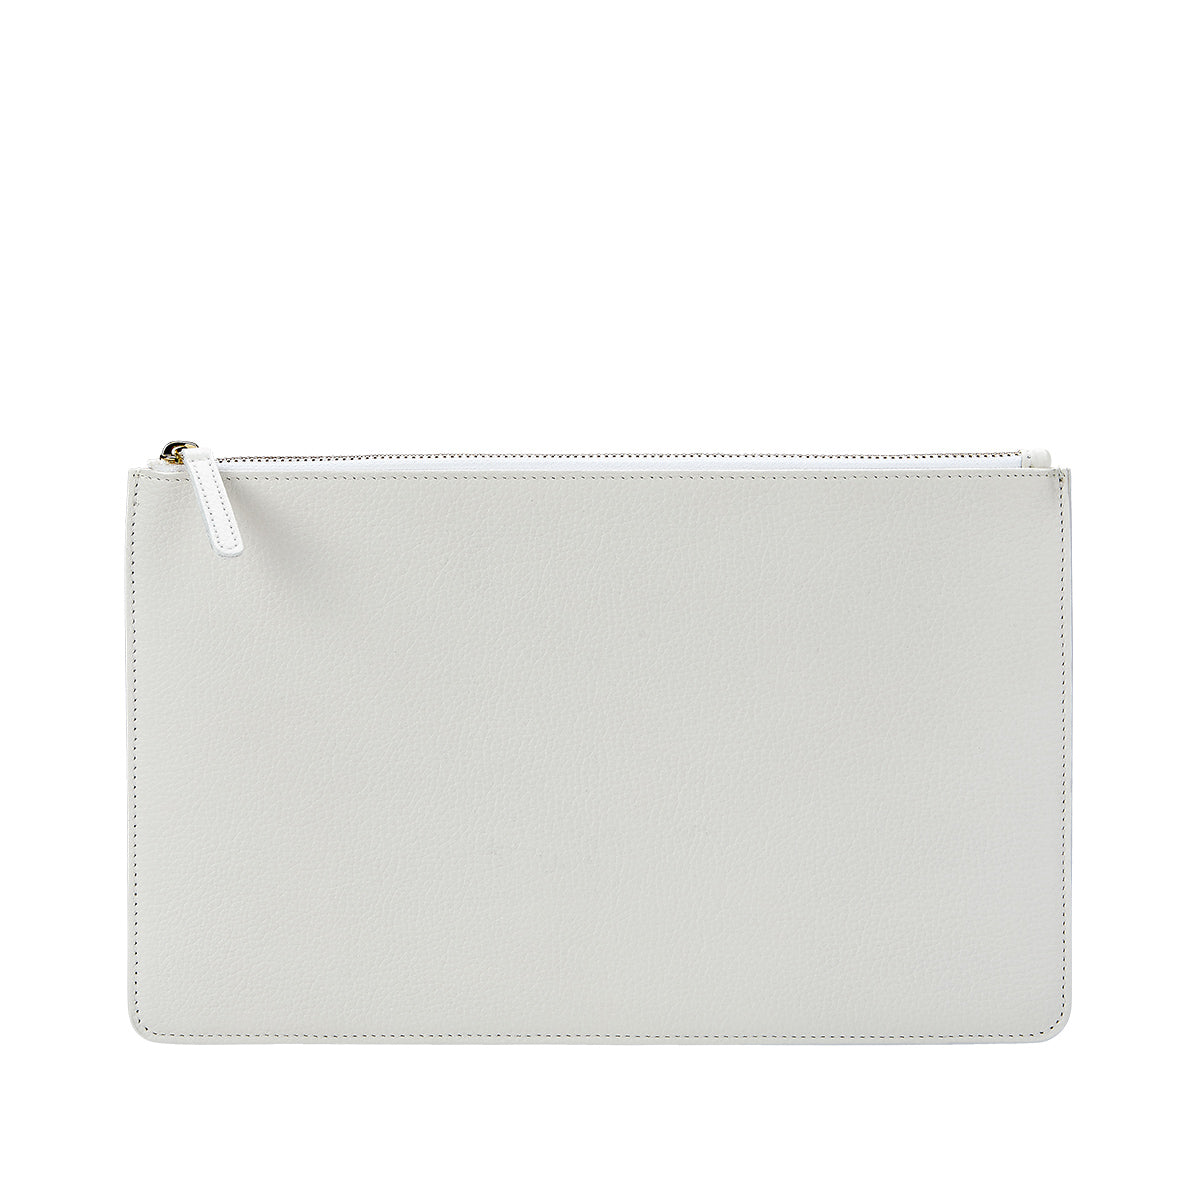 Graphic Image Signature Leather Pouch White Goatskin Leather